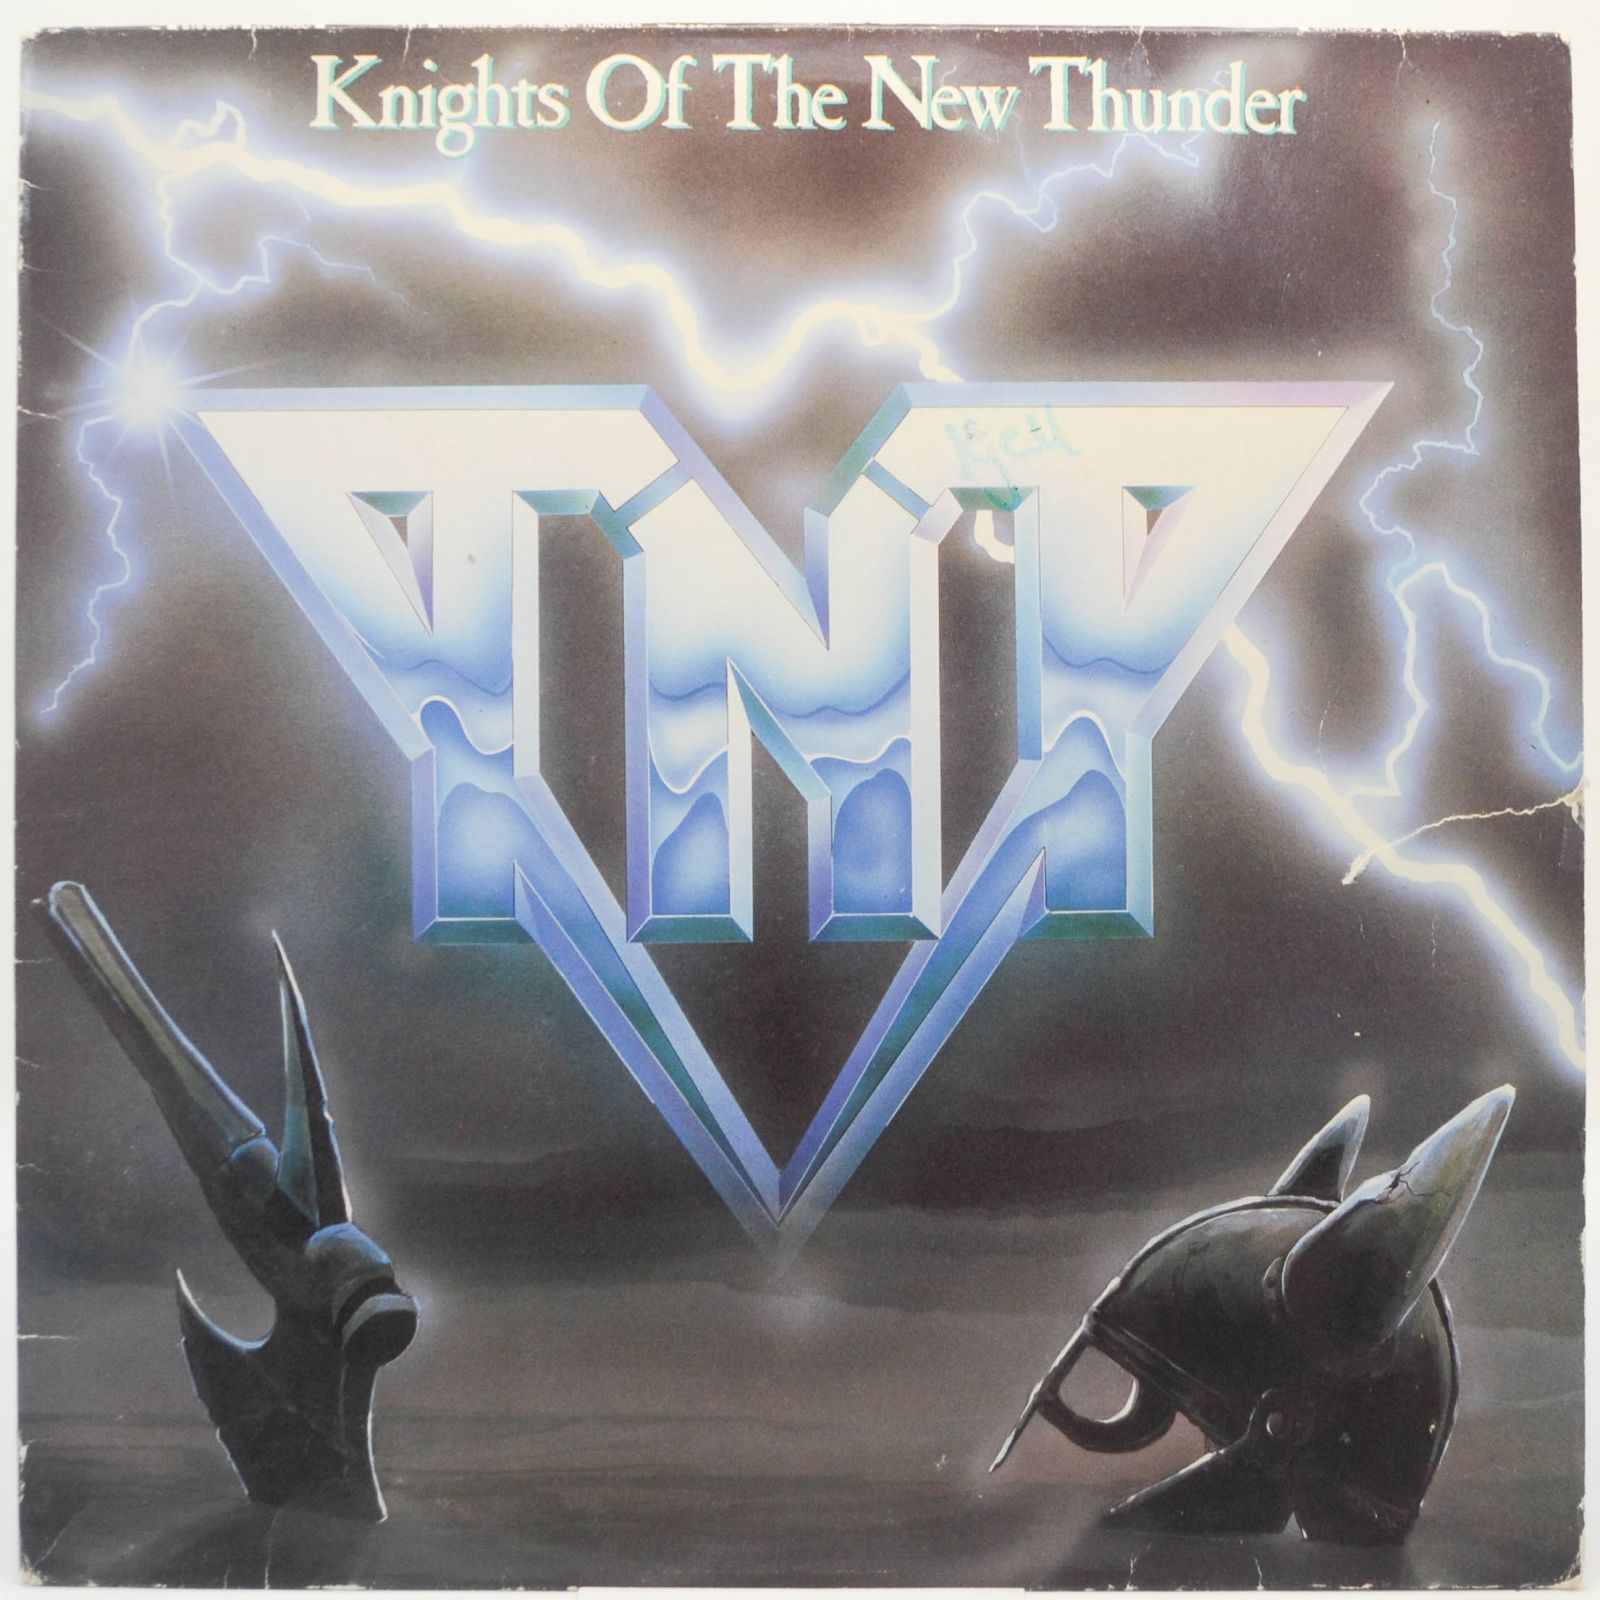 Knights Of The New Thunder, 1984